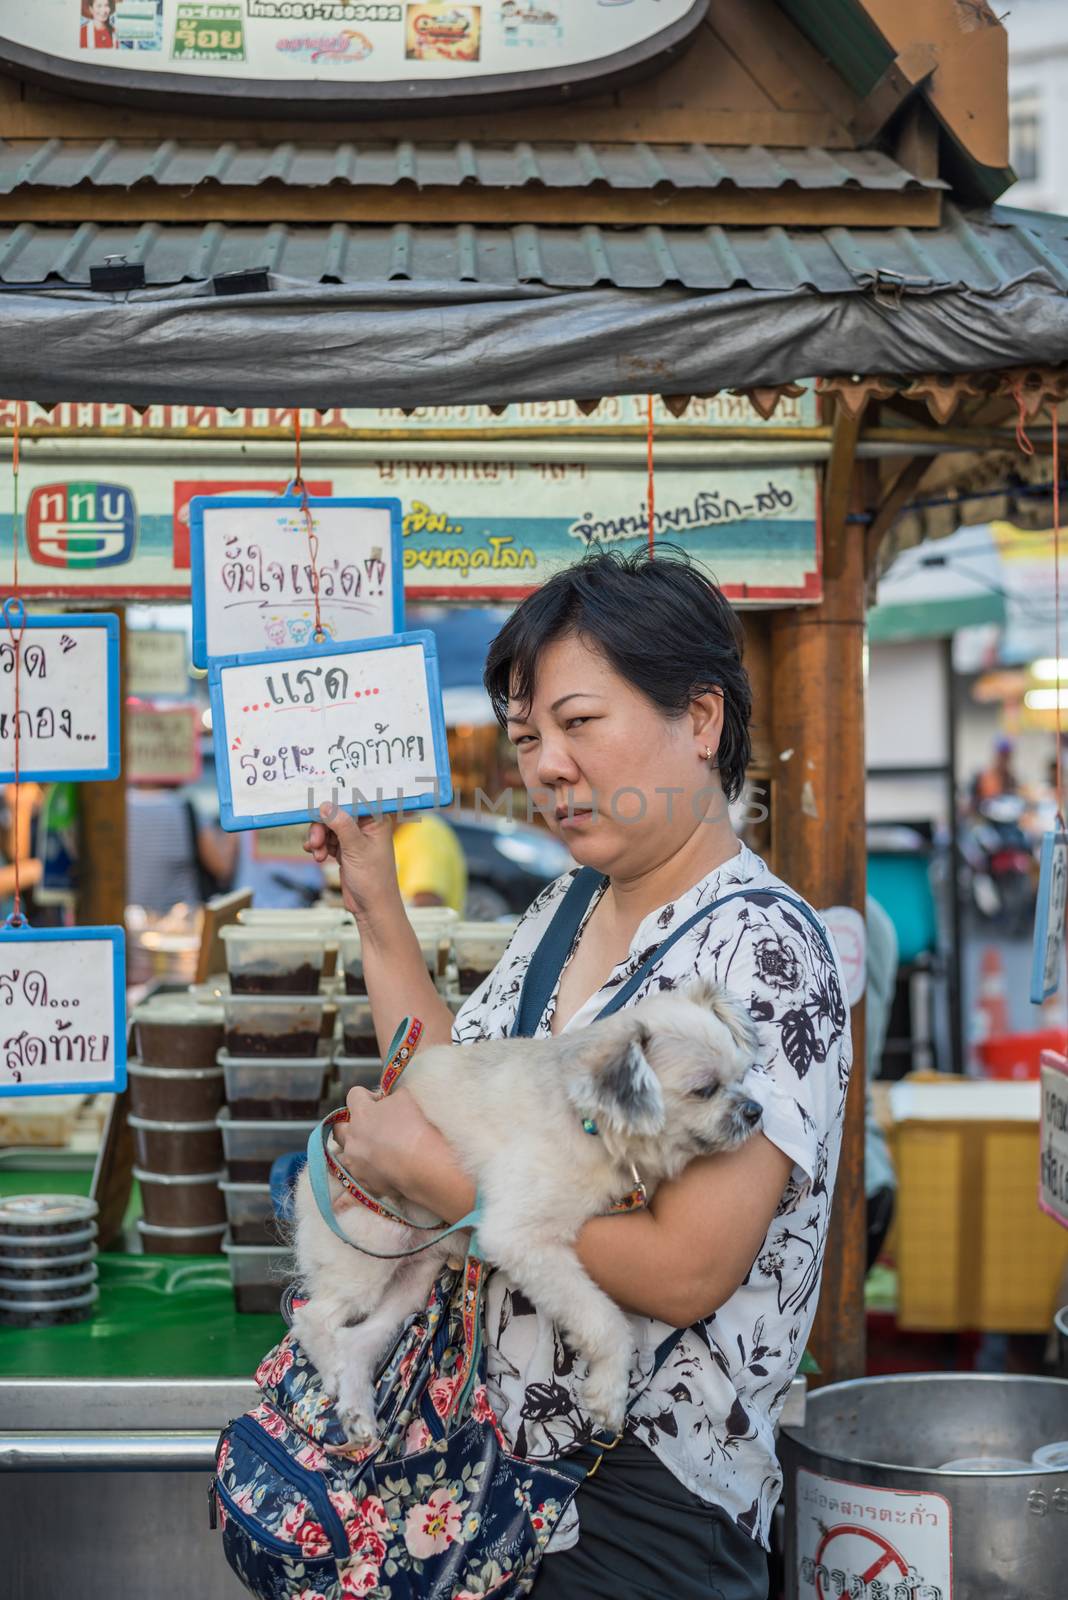 Prachuap Khiri Khan, Thailand - June 17, 2017 : Unidentified woman and the dog walk stroll shopping at Hua Hin night market. The famous night market for travel in Hua Hin is major tourist attraction.